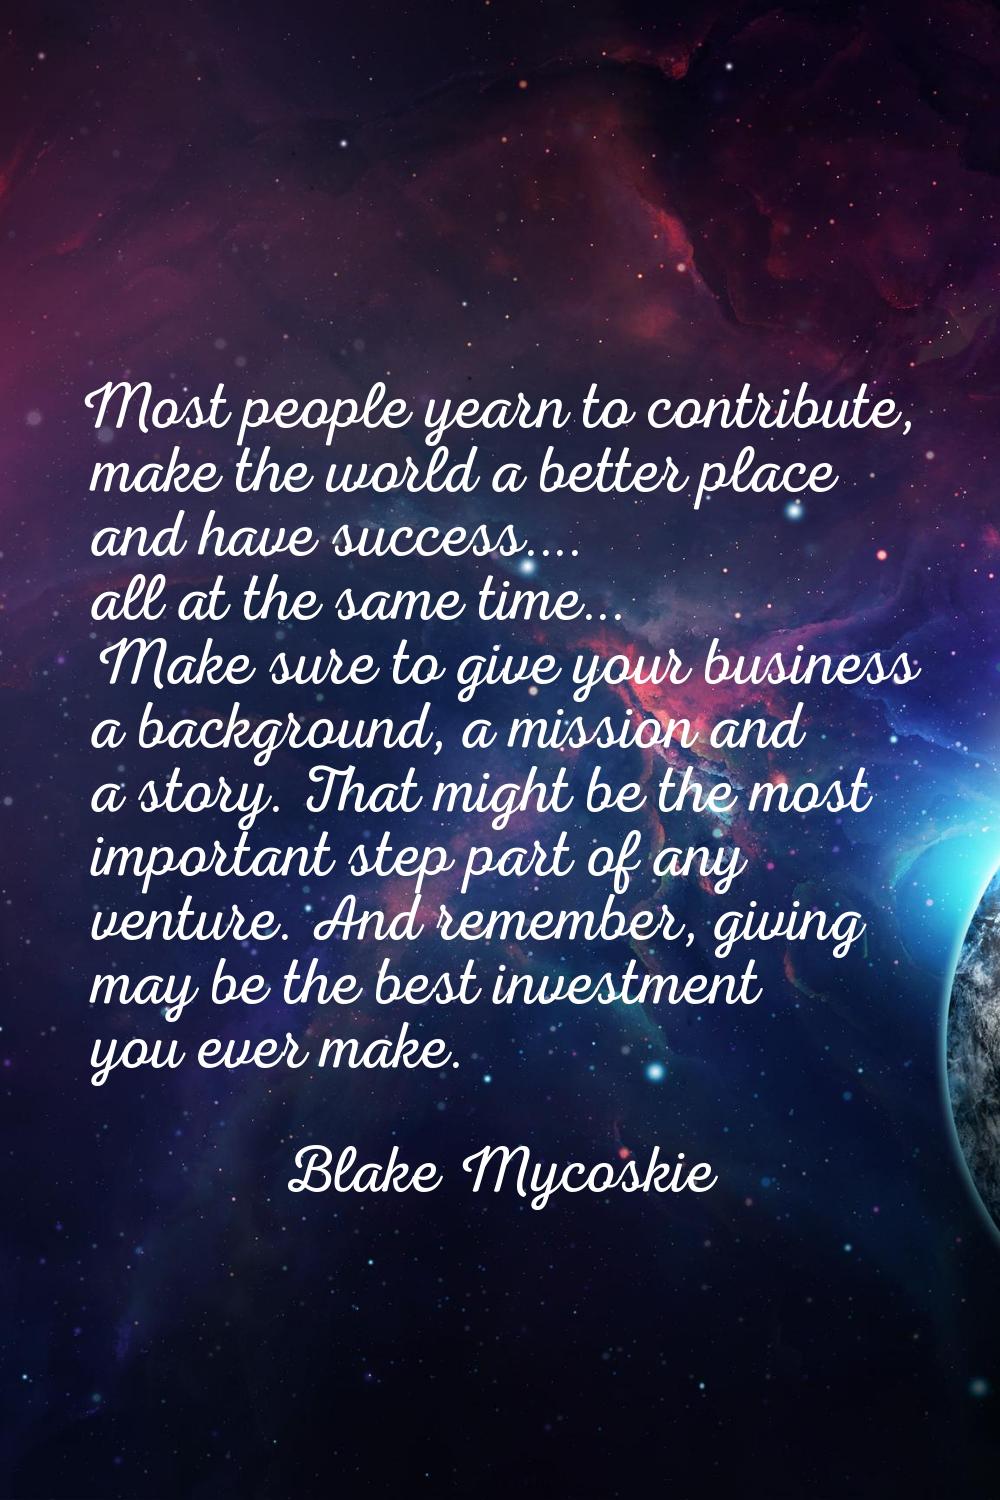 Most people yearn to contribute, make the world a better place and have success.... all at the same